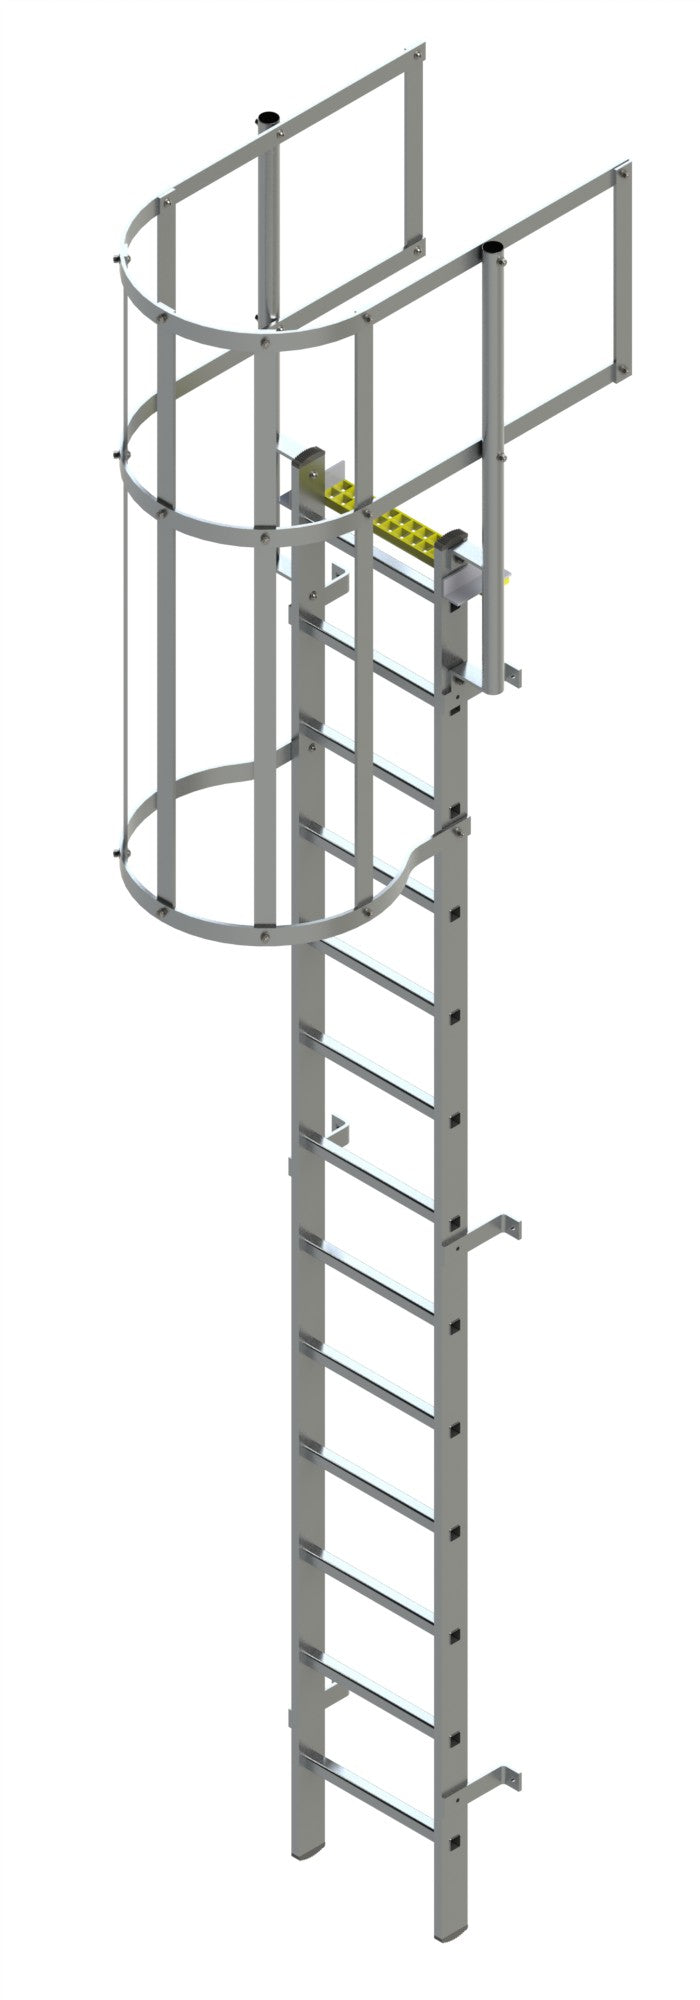 Fixed Vertical Ladder with Safety Cage & Walkthrough 7.6 - 8.4 m